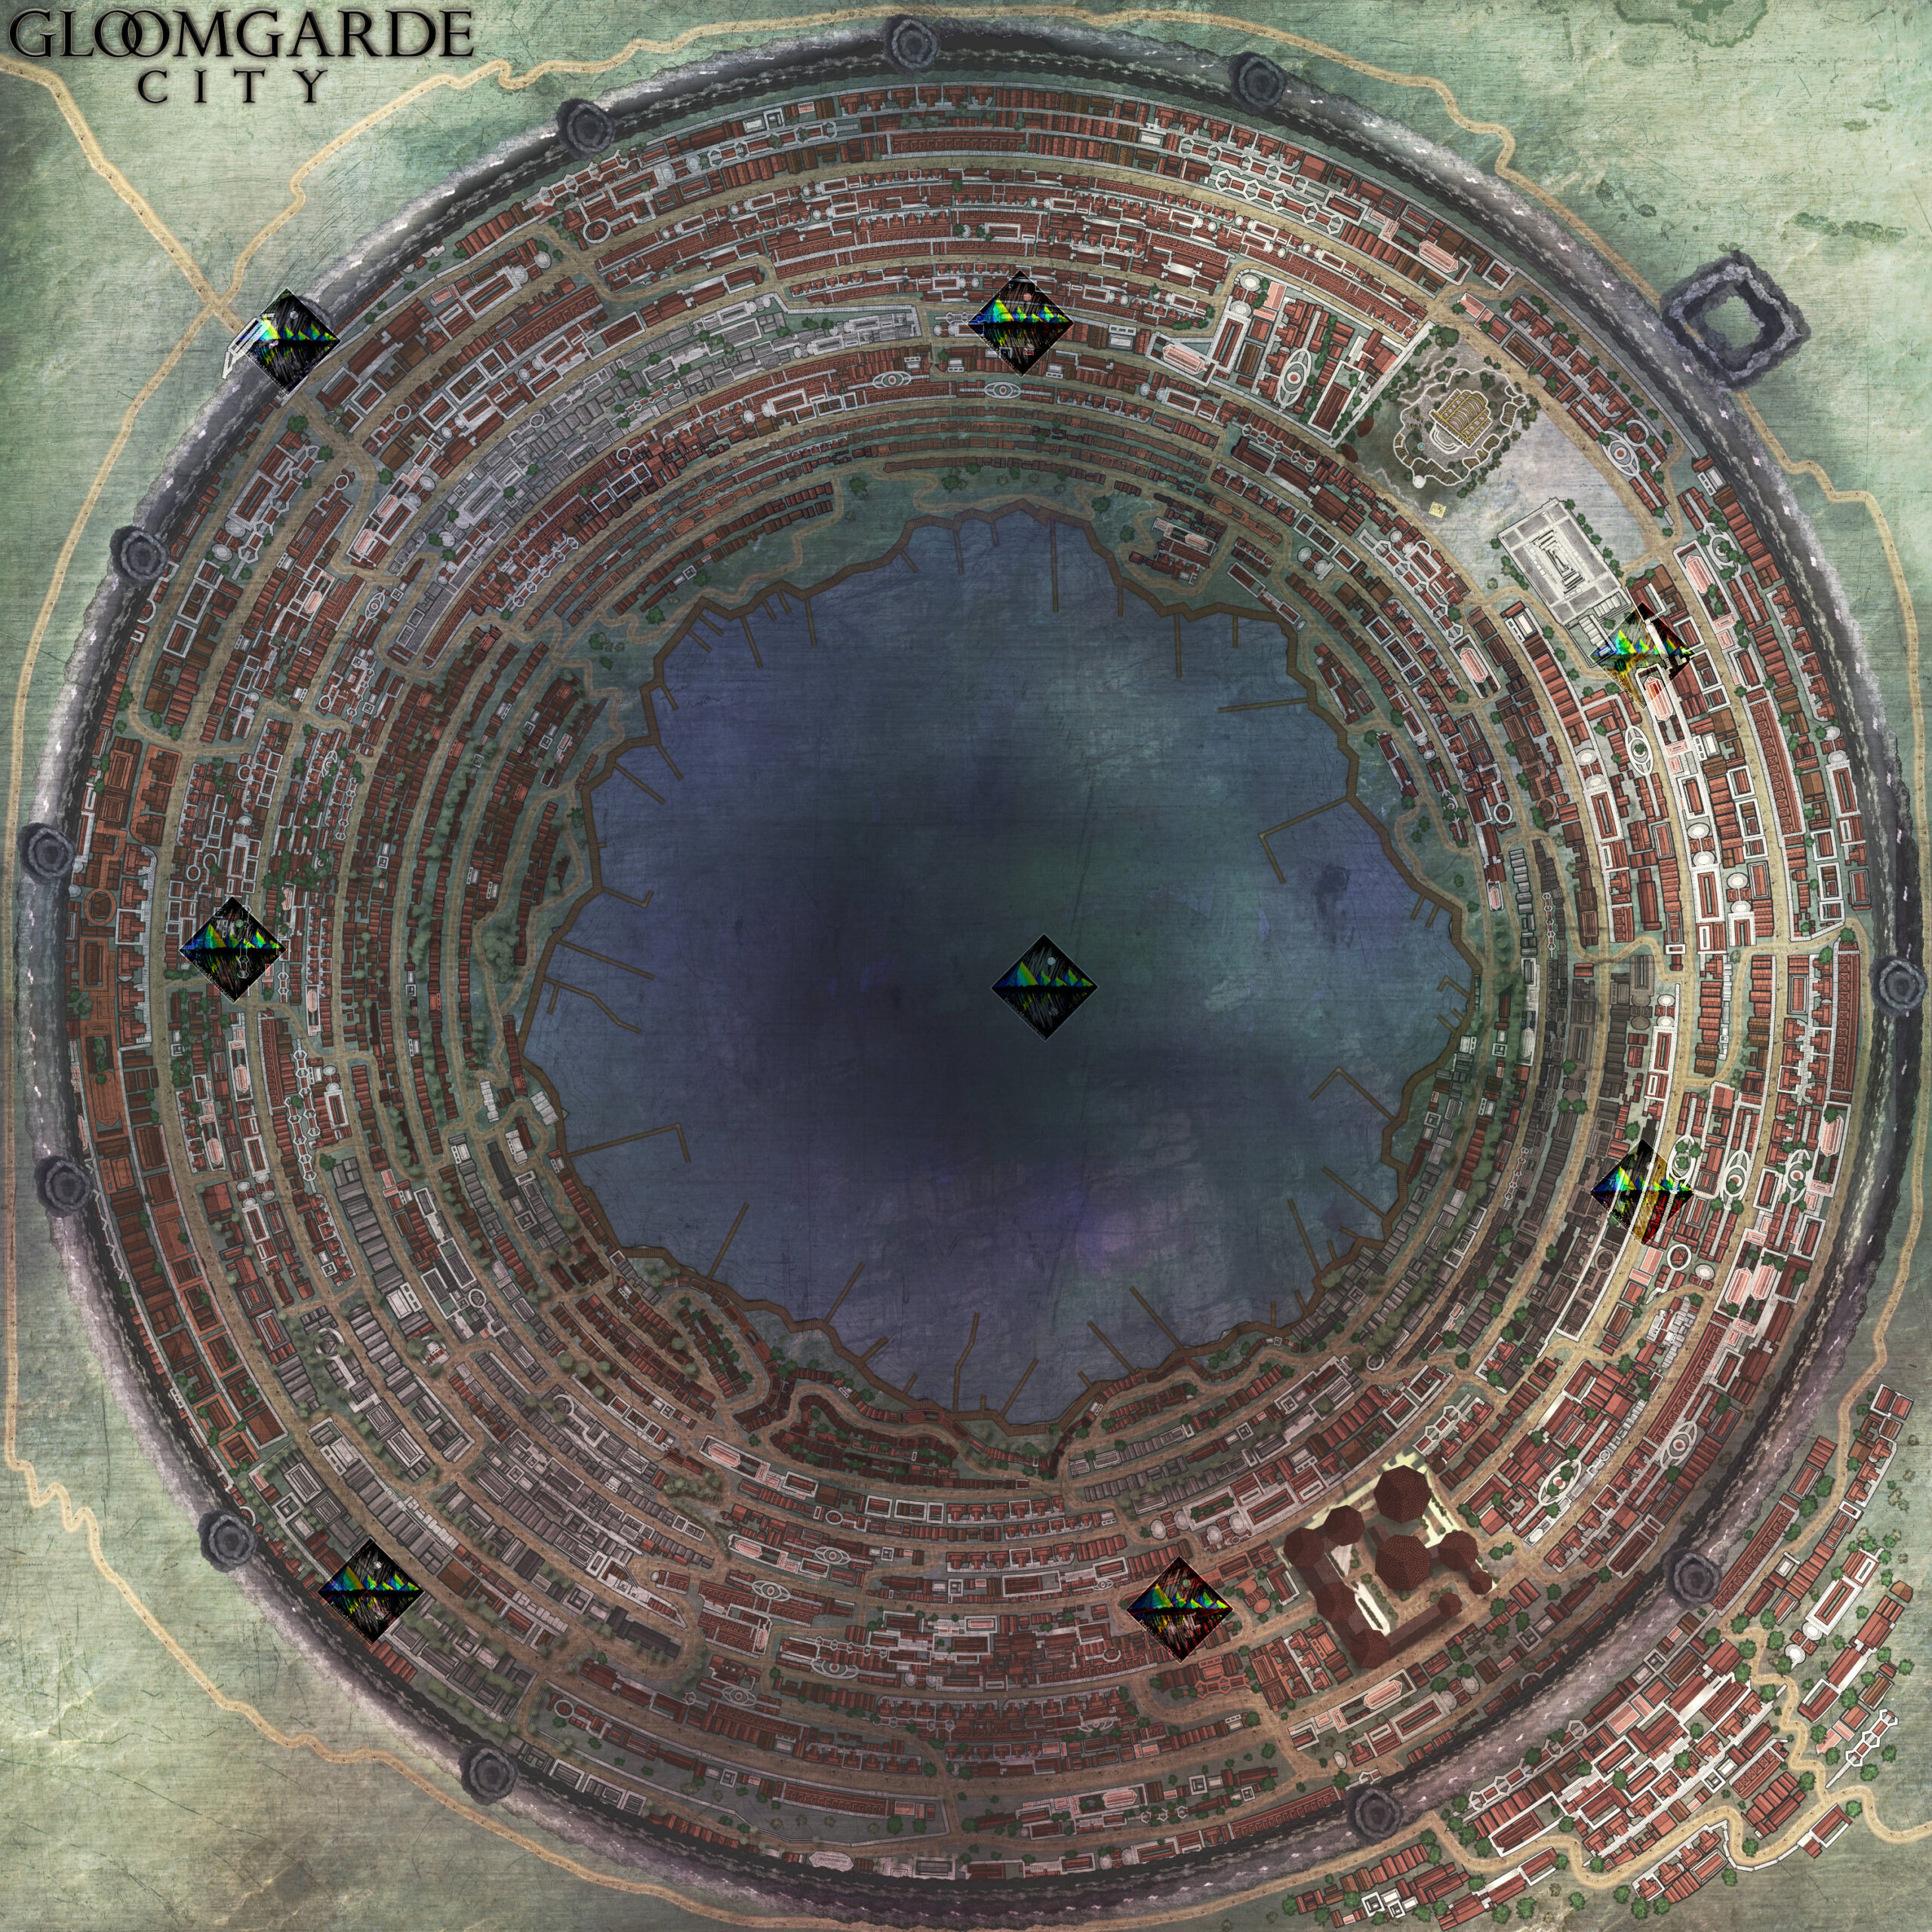 Caldera round ring city with lake in the middle volcano caldera crater canyon VTT virtual tabletop dungeons and dragons game master map blank